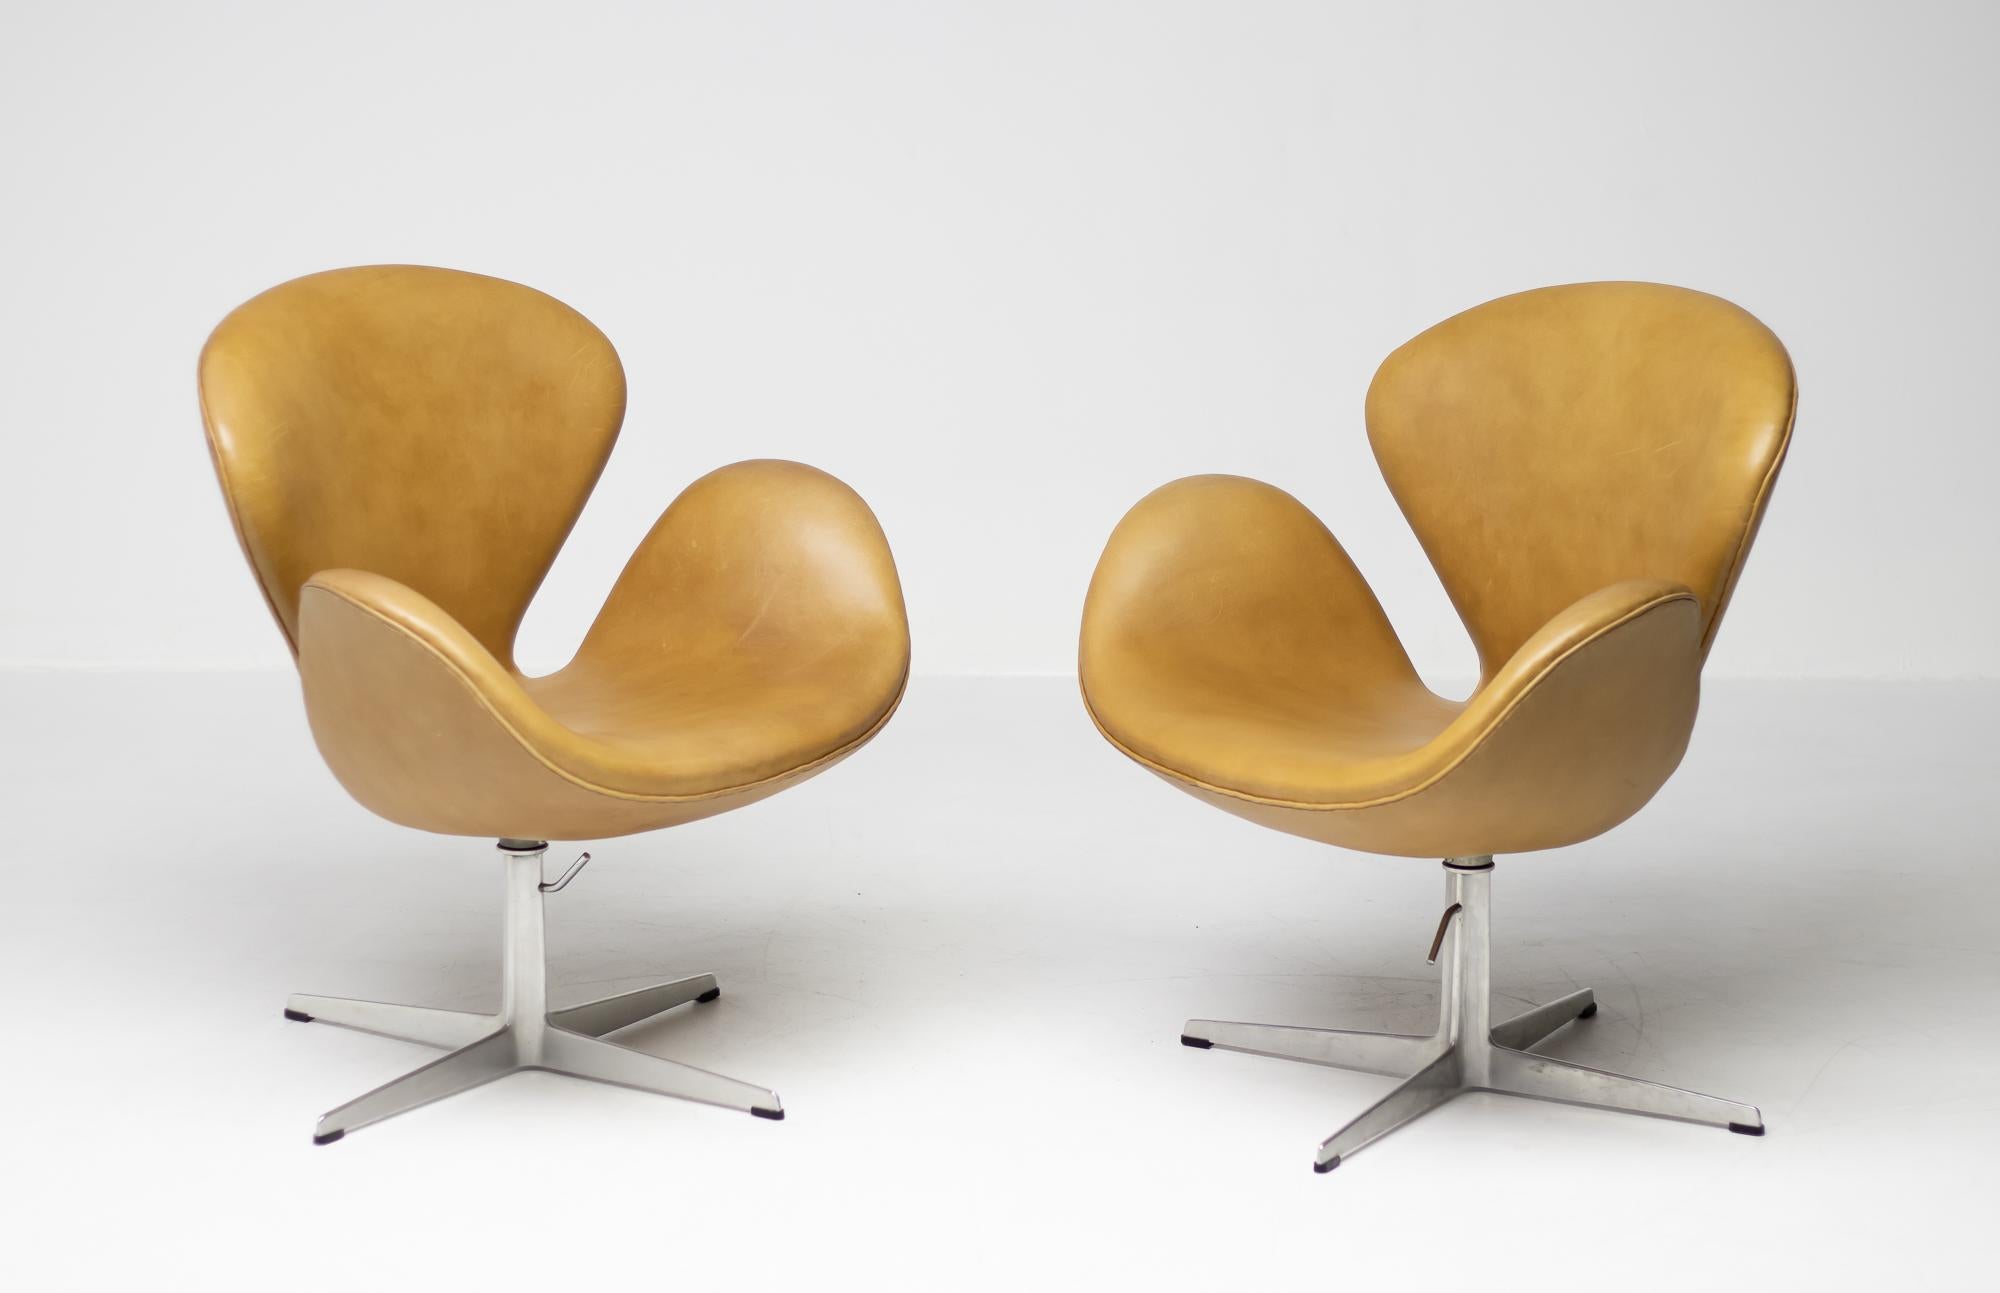 Late 20th Century 1971 Leather Swan Chairs by Arne Jacobsen